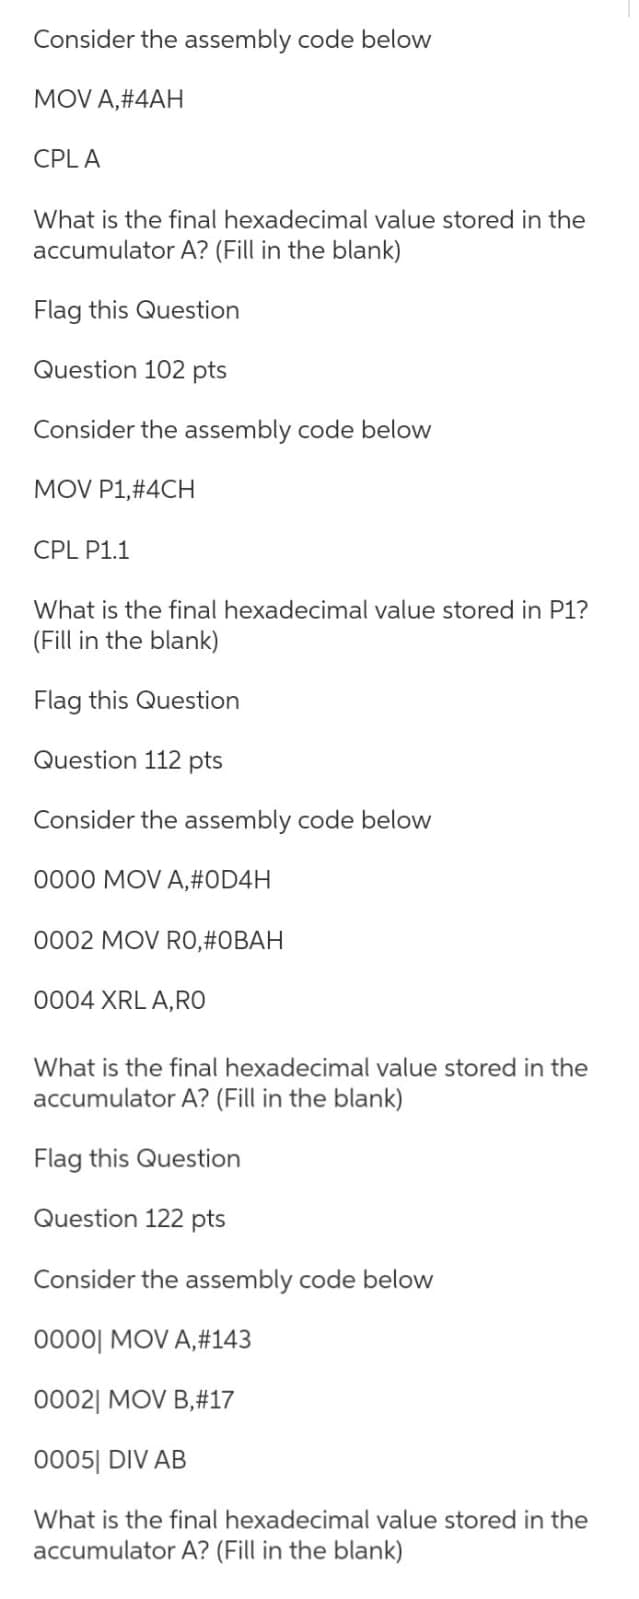 Consider the assembly code below
MOV A,#4AH
CPLA
What is the final hexadecimal value stored in the
accumulator A? (Fill in the blank)
Flag this Question
Question 102 pts
Consider the assembly code below
MOV P1,#4CH
CPL P1.1
What is the final hexadecimal value stored in P1?
(Fill in the blank)
Flag this Question
Question 112 pts
Consider the assembly code below
0000 MOV A,#OD4H
0002 MOV RO,#OBAH
0004 XRL A,RO
What is the final hexadecimal value stored in the
accumulator A? (Fill in the blank)
Flag this Question
Question 122 pts
Consider the assembly code below
0000| MOV A, #143
00021 MOV B,#17
0005 DIV AB
What is the final hexadecimal value stored in the
accumulator A? (Fill in the blank)